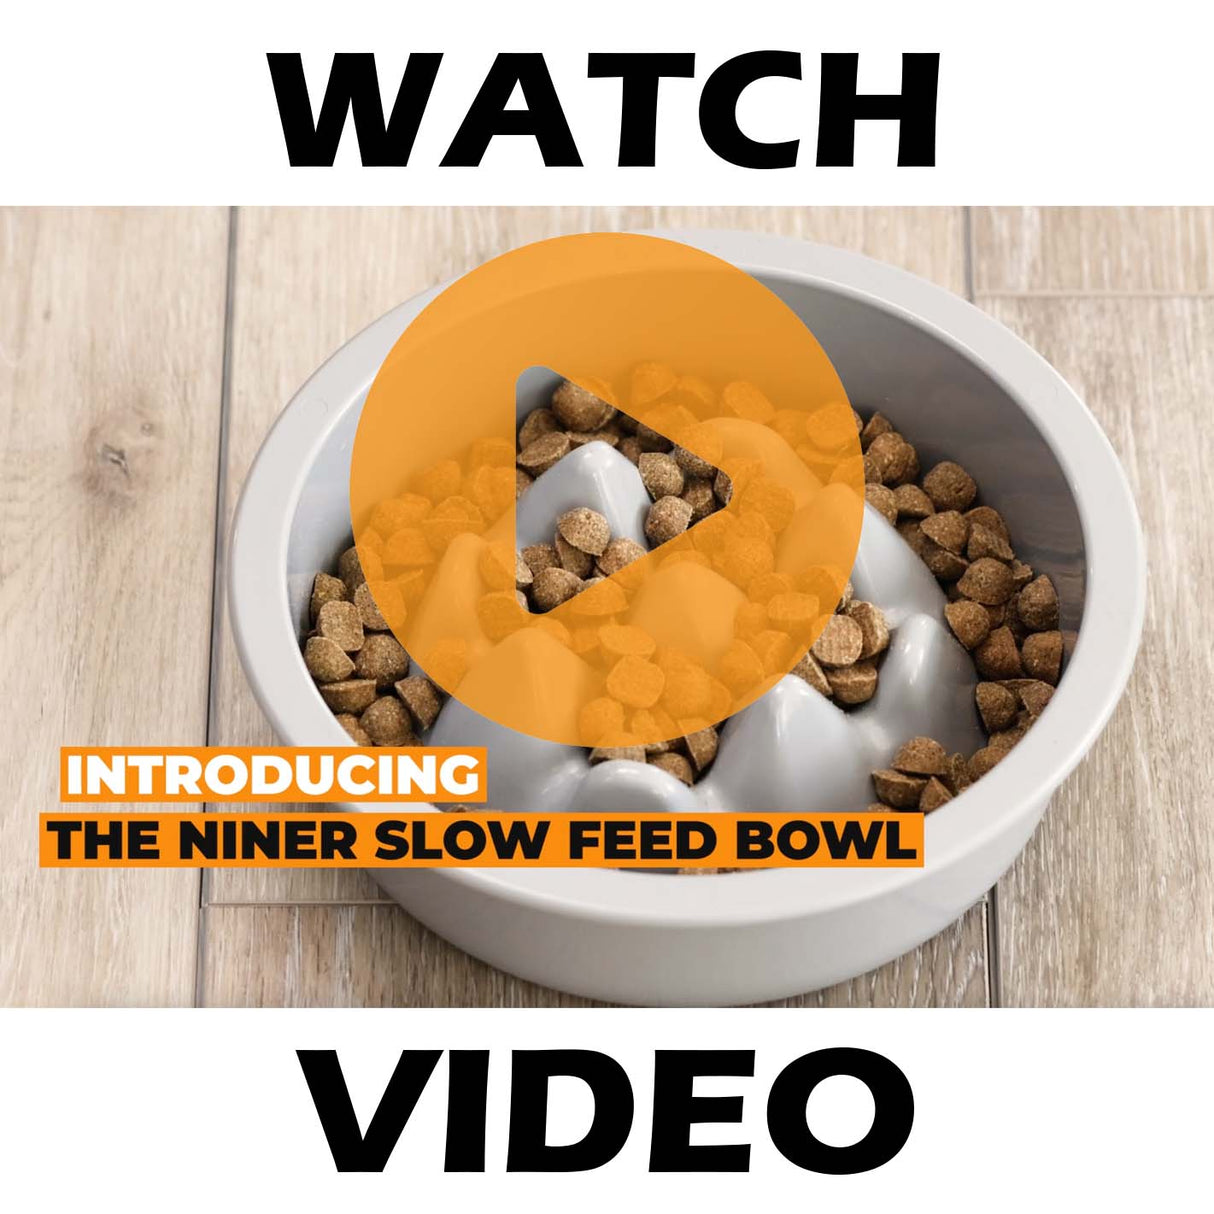 Dog Bowl Food Maze - Interactive Treat Feeder + Water Dish All For Paws Pet